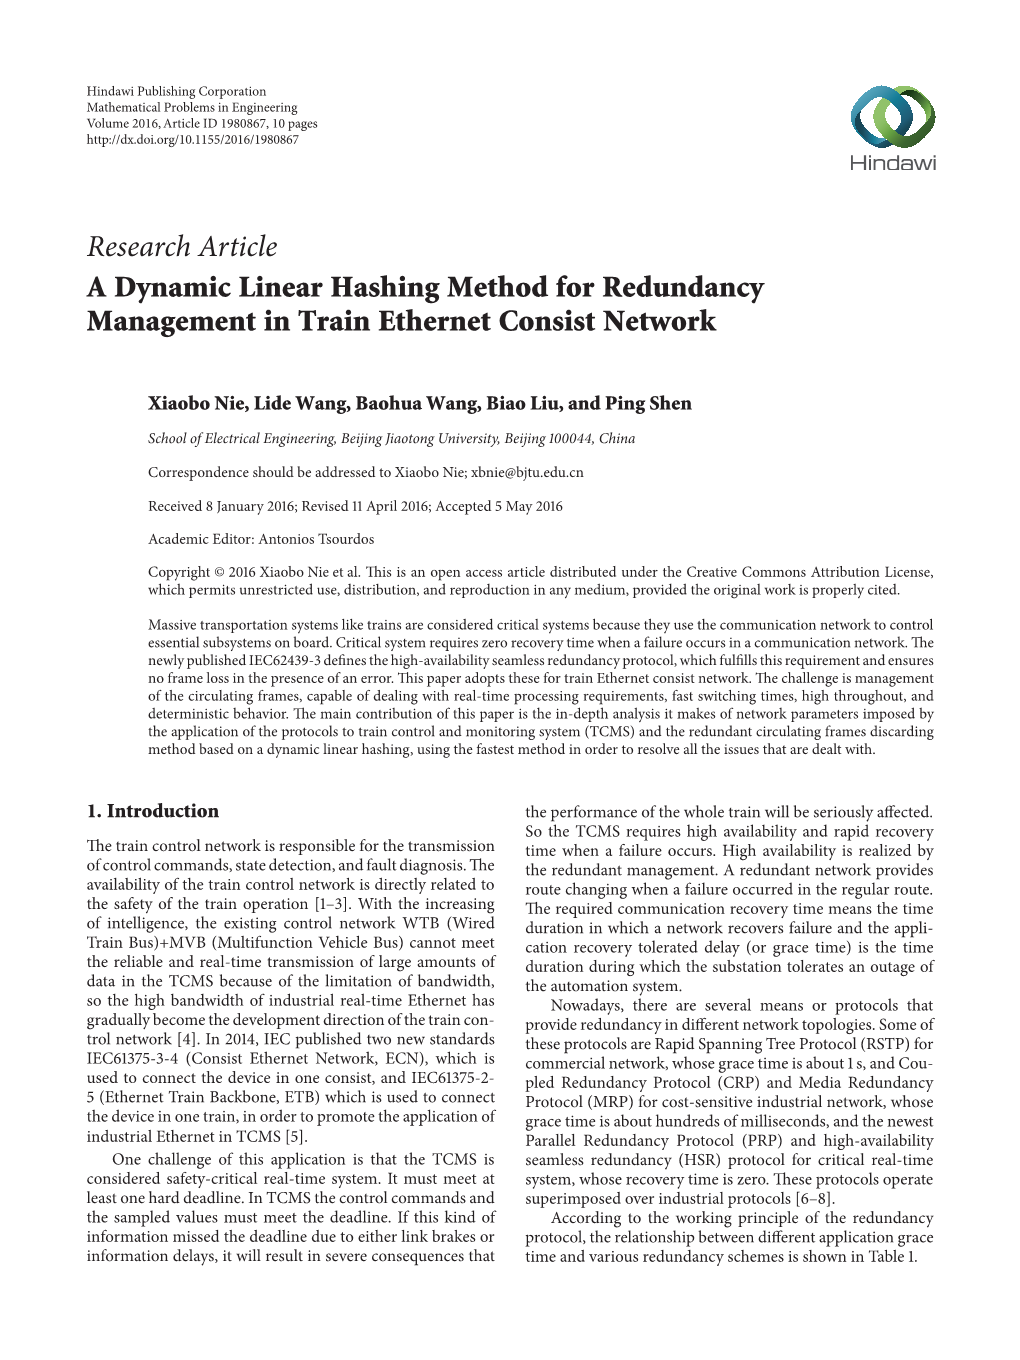 A Dynamic Linear Hashing Method for Redundancy Management in Train Ethernet Consist Network